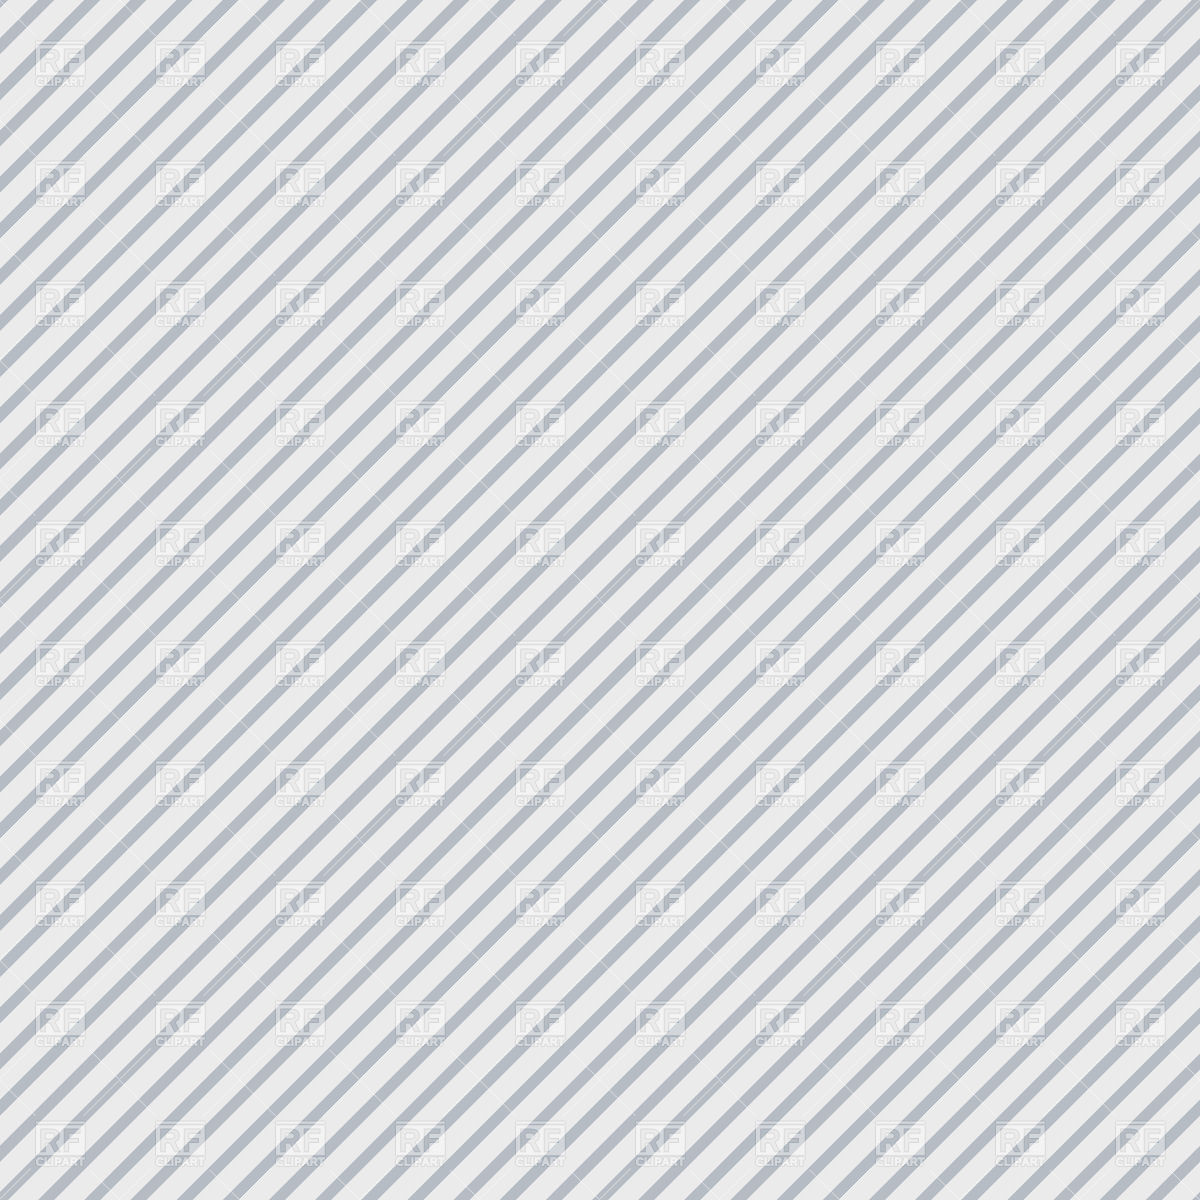 Pattern With Diagonal Lines   Seamless Wallpaper 33152 Backgrounds    